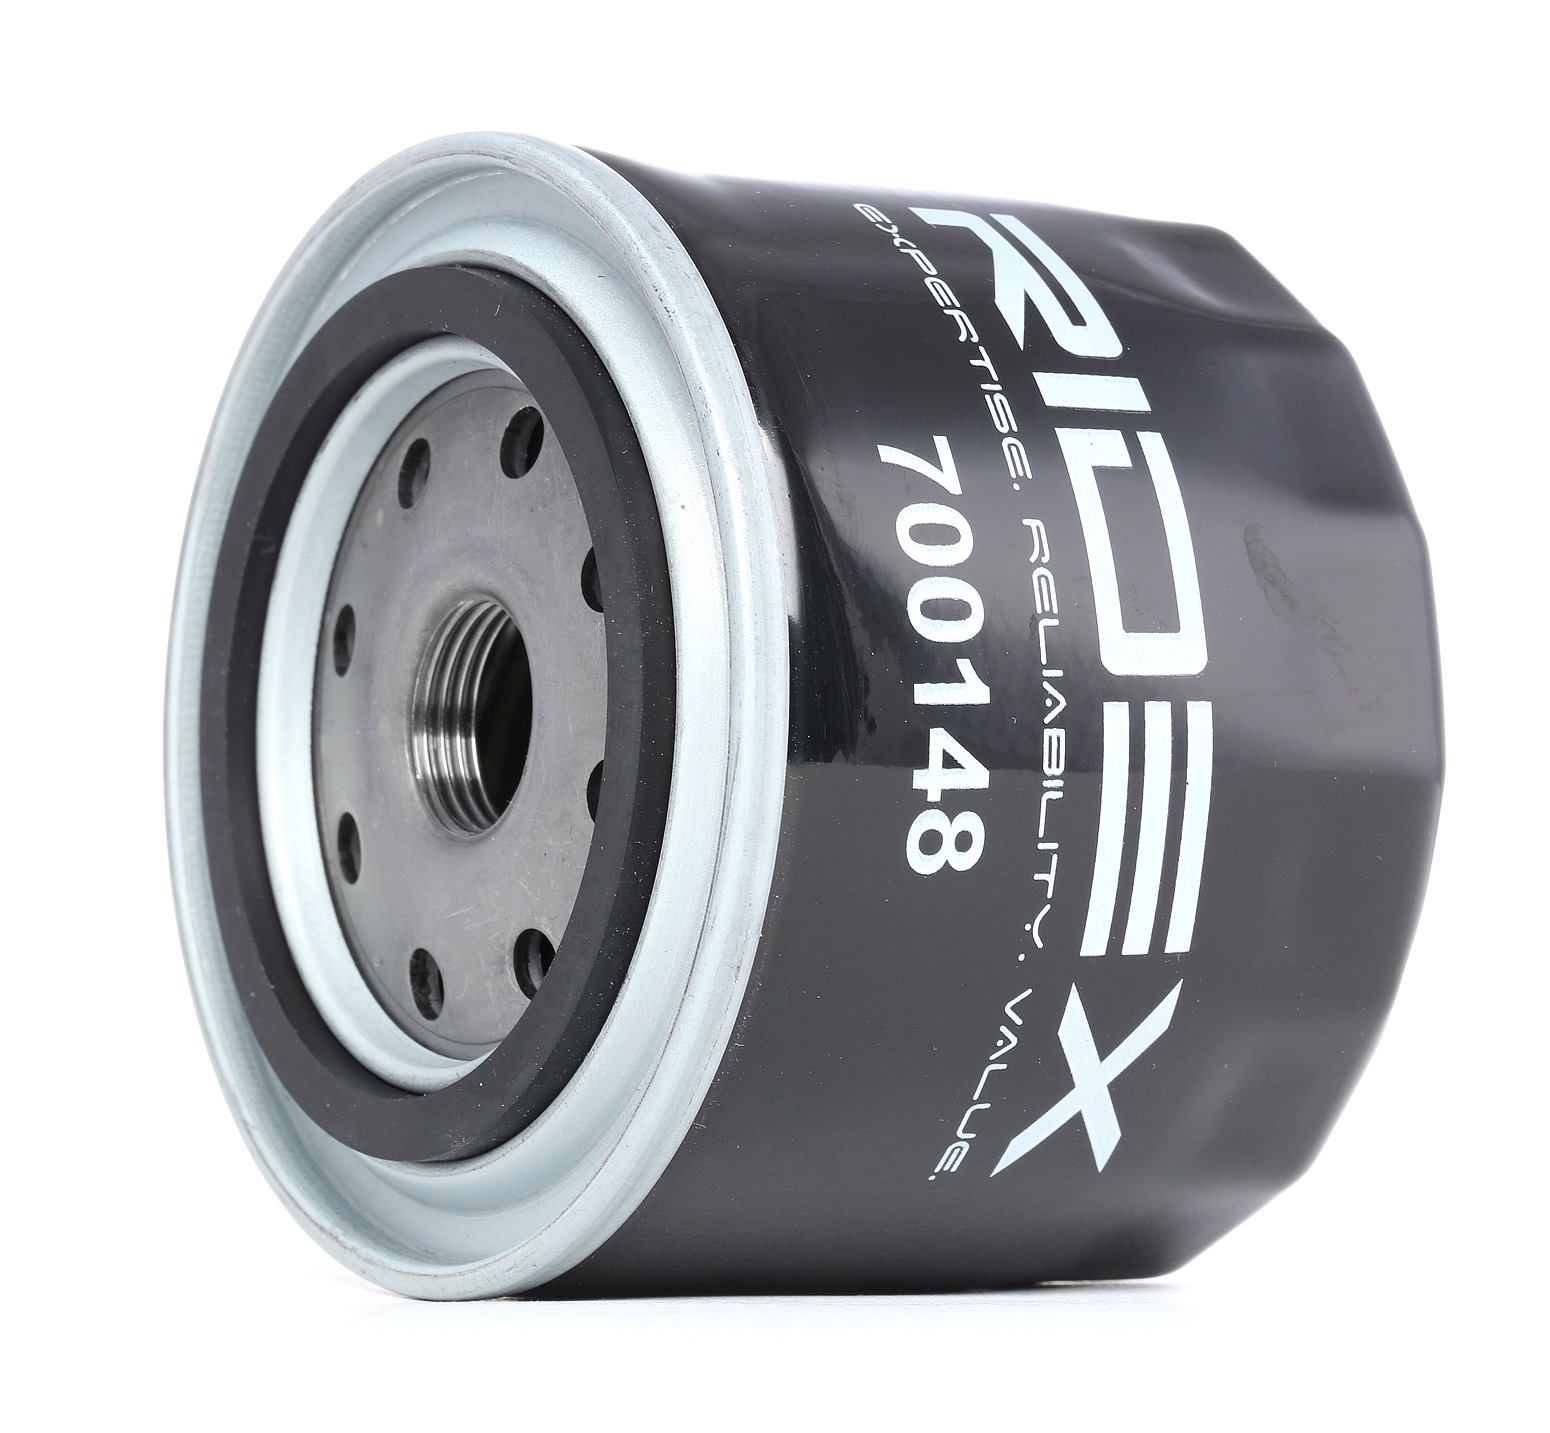 RIDEX 7O0148 Oil filter M 20 X 1.5, with one anti-return valve, Spin-on Filter